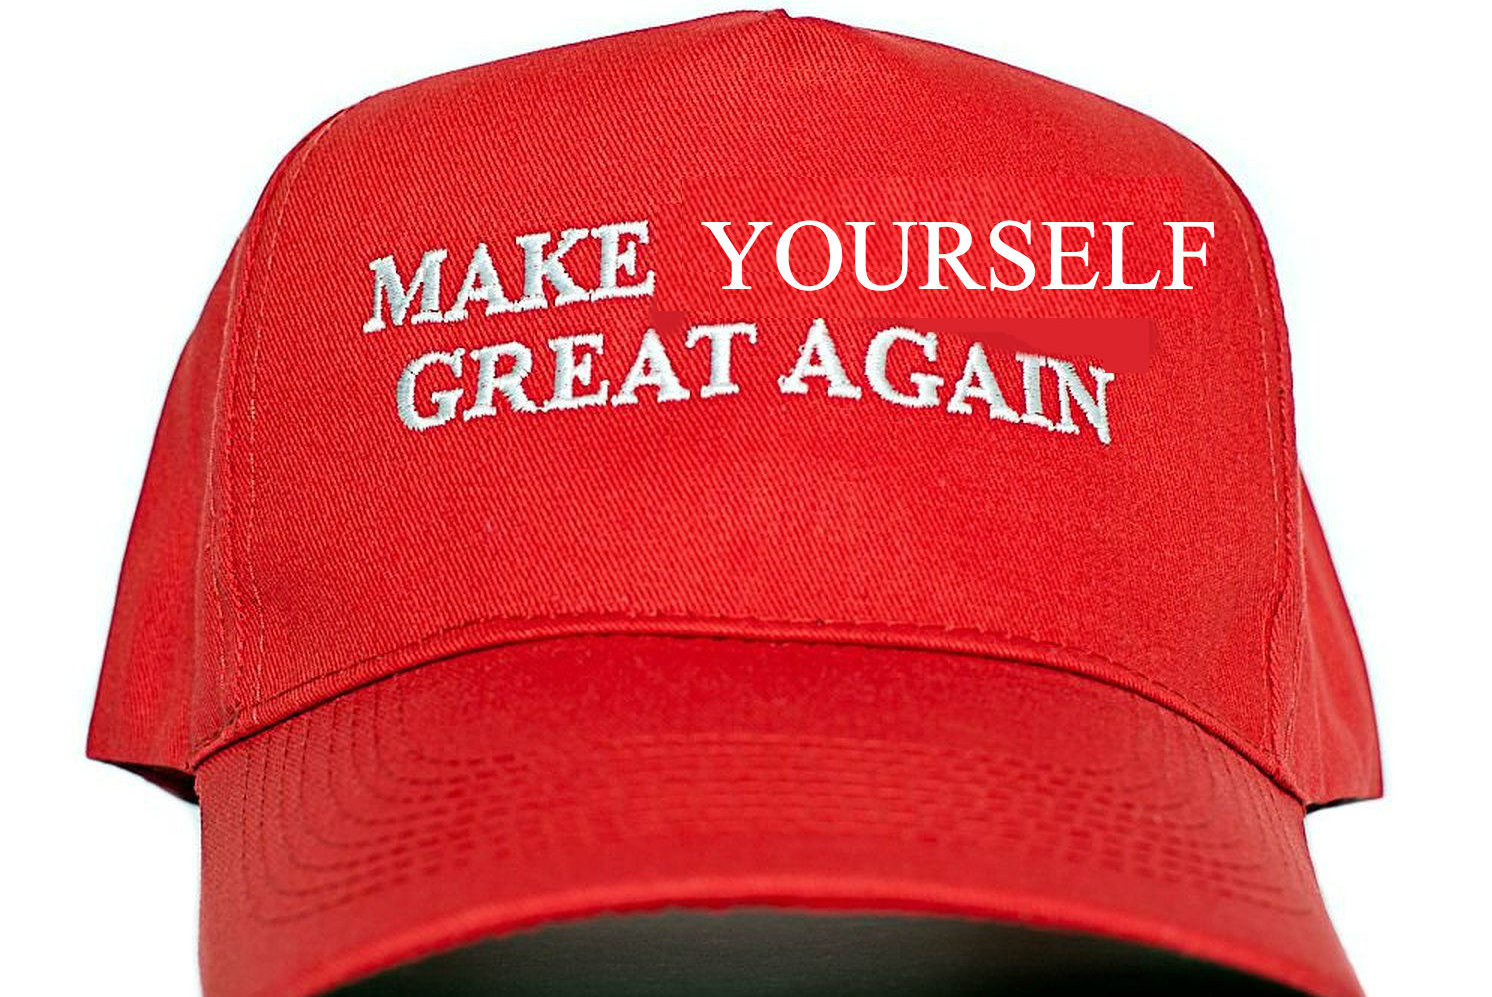 Make YOURSELF great again